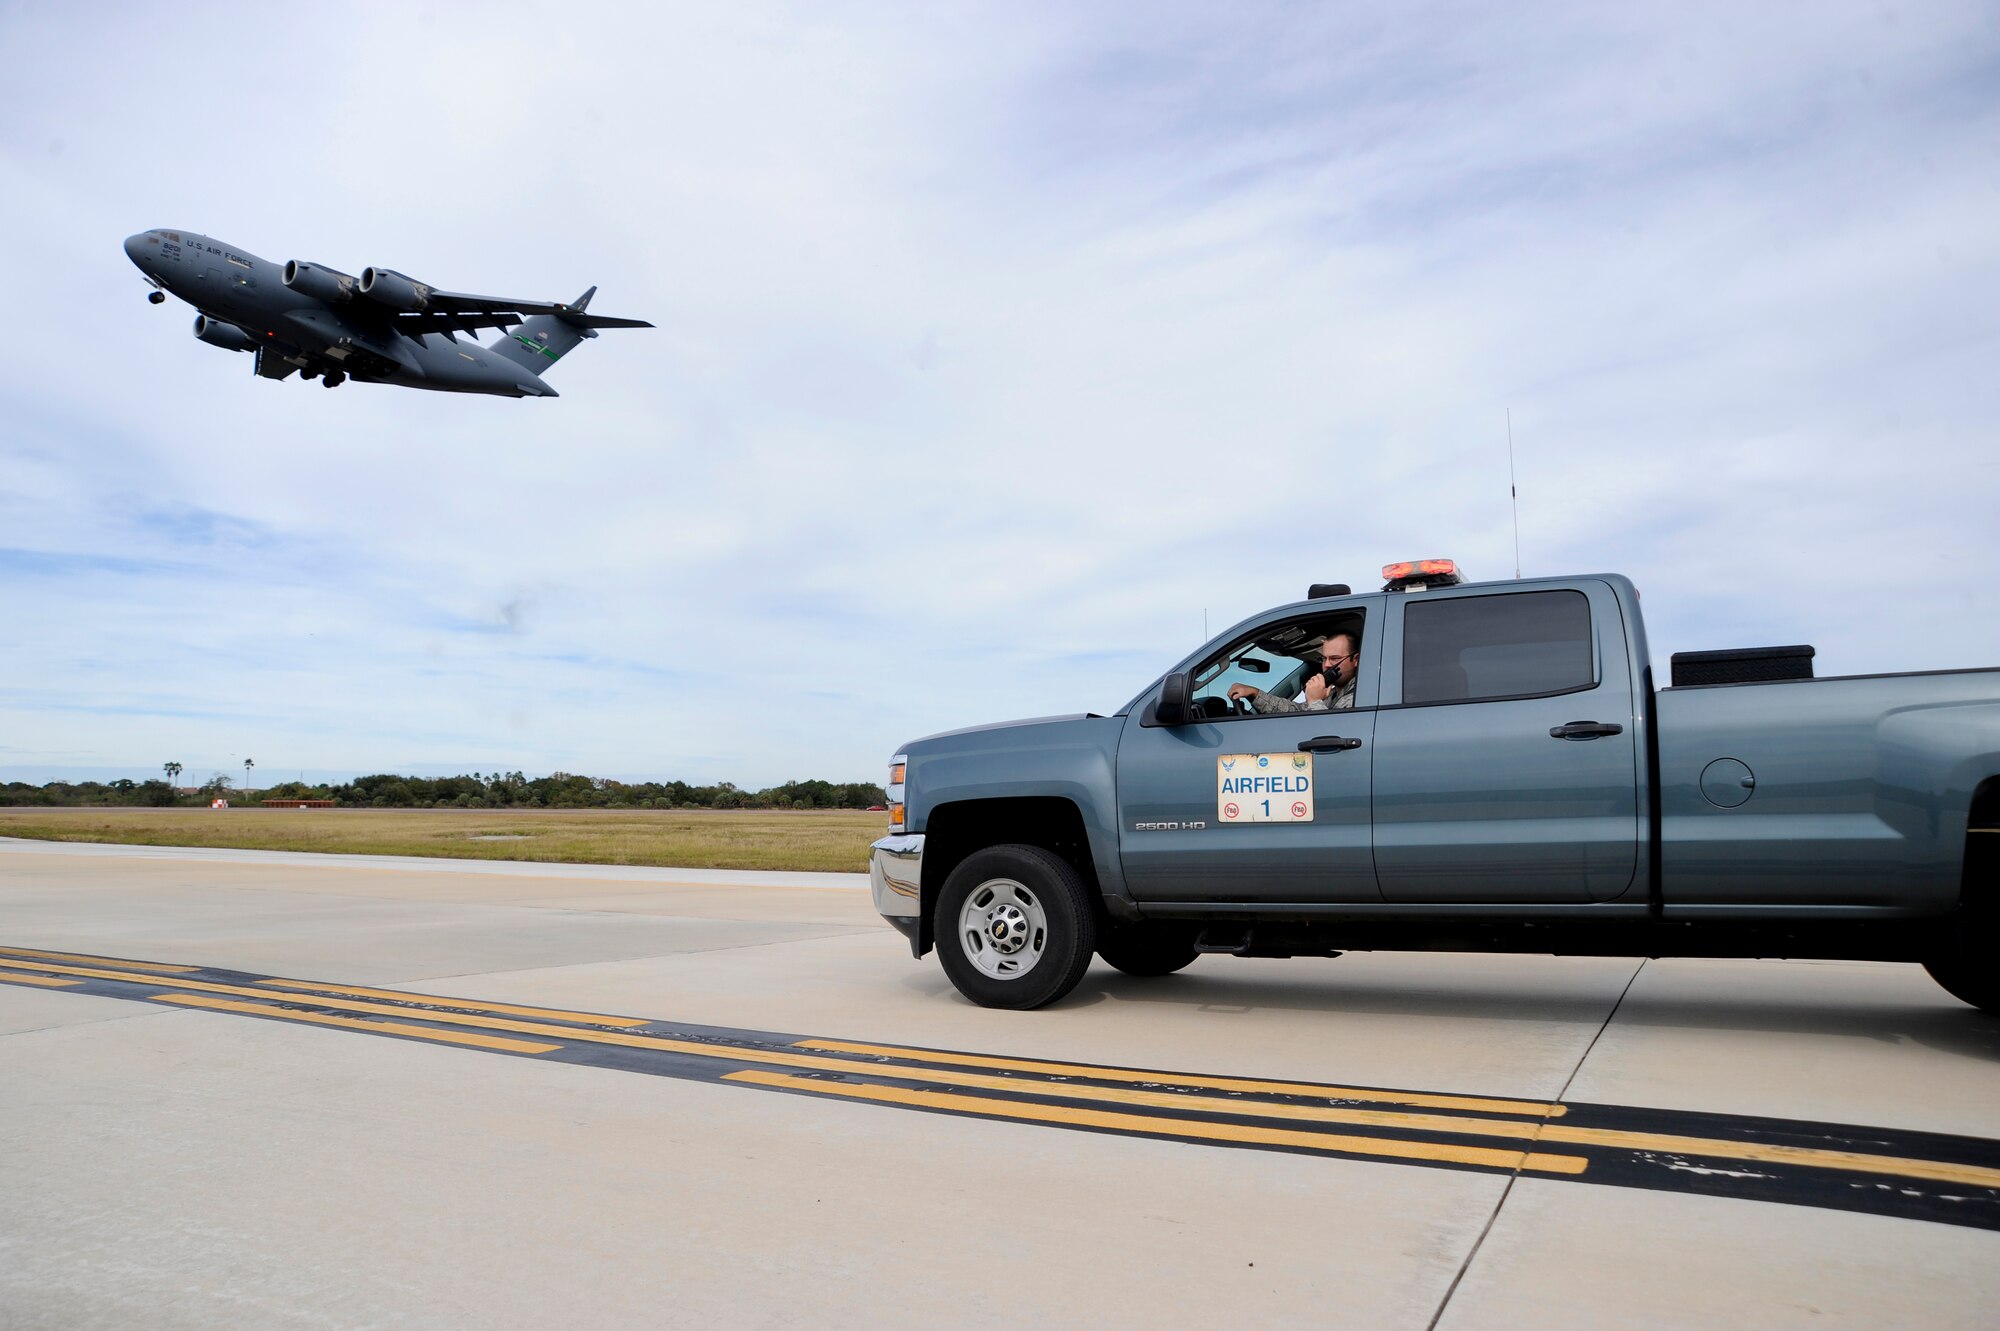 Staff Sgt. Michael David, an airfield management operations supervisor with the 6th Operations Support Squadron, waits for the air traffic control tower to clear him onto the airfield at MacDill Air Force Base, Fla., Jan. 22, 2016. Airfield management Airmen are responsible for performing multiple daily airfield checks to ensure it’s safe for aircraft. (U.S. Air Force photo by Airman 1st Class Mariette M. Adams)